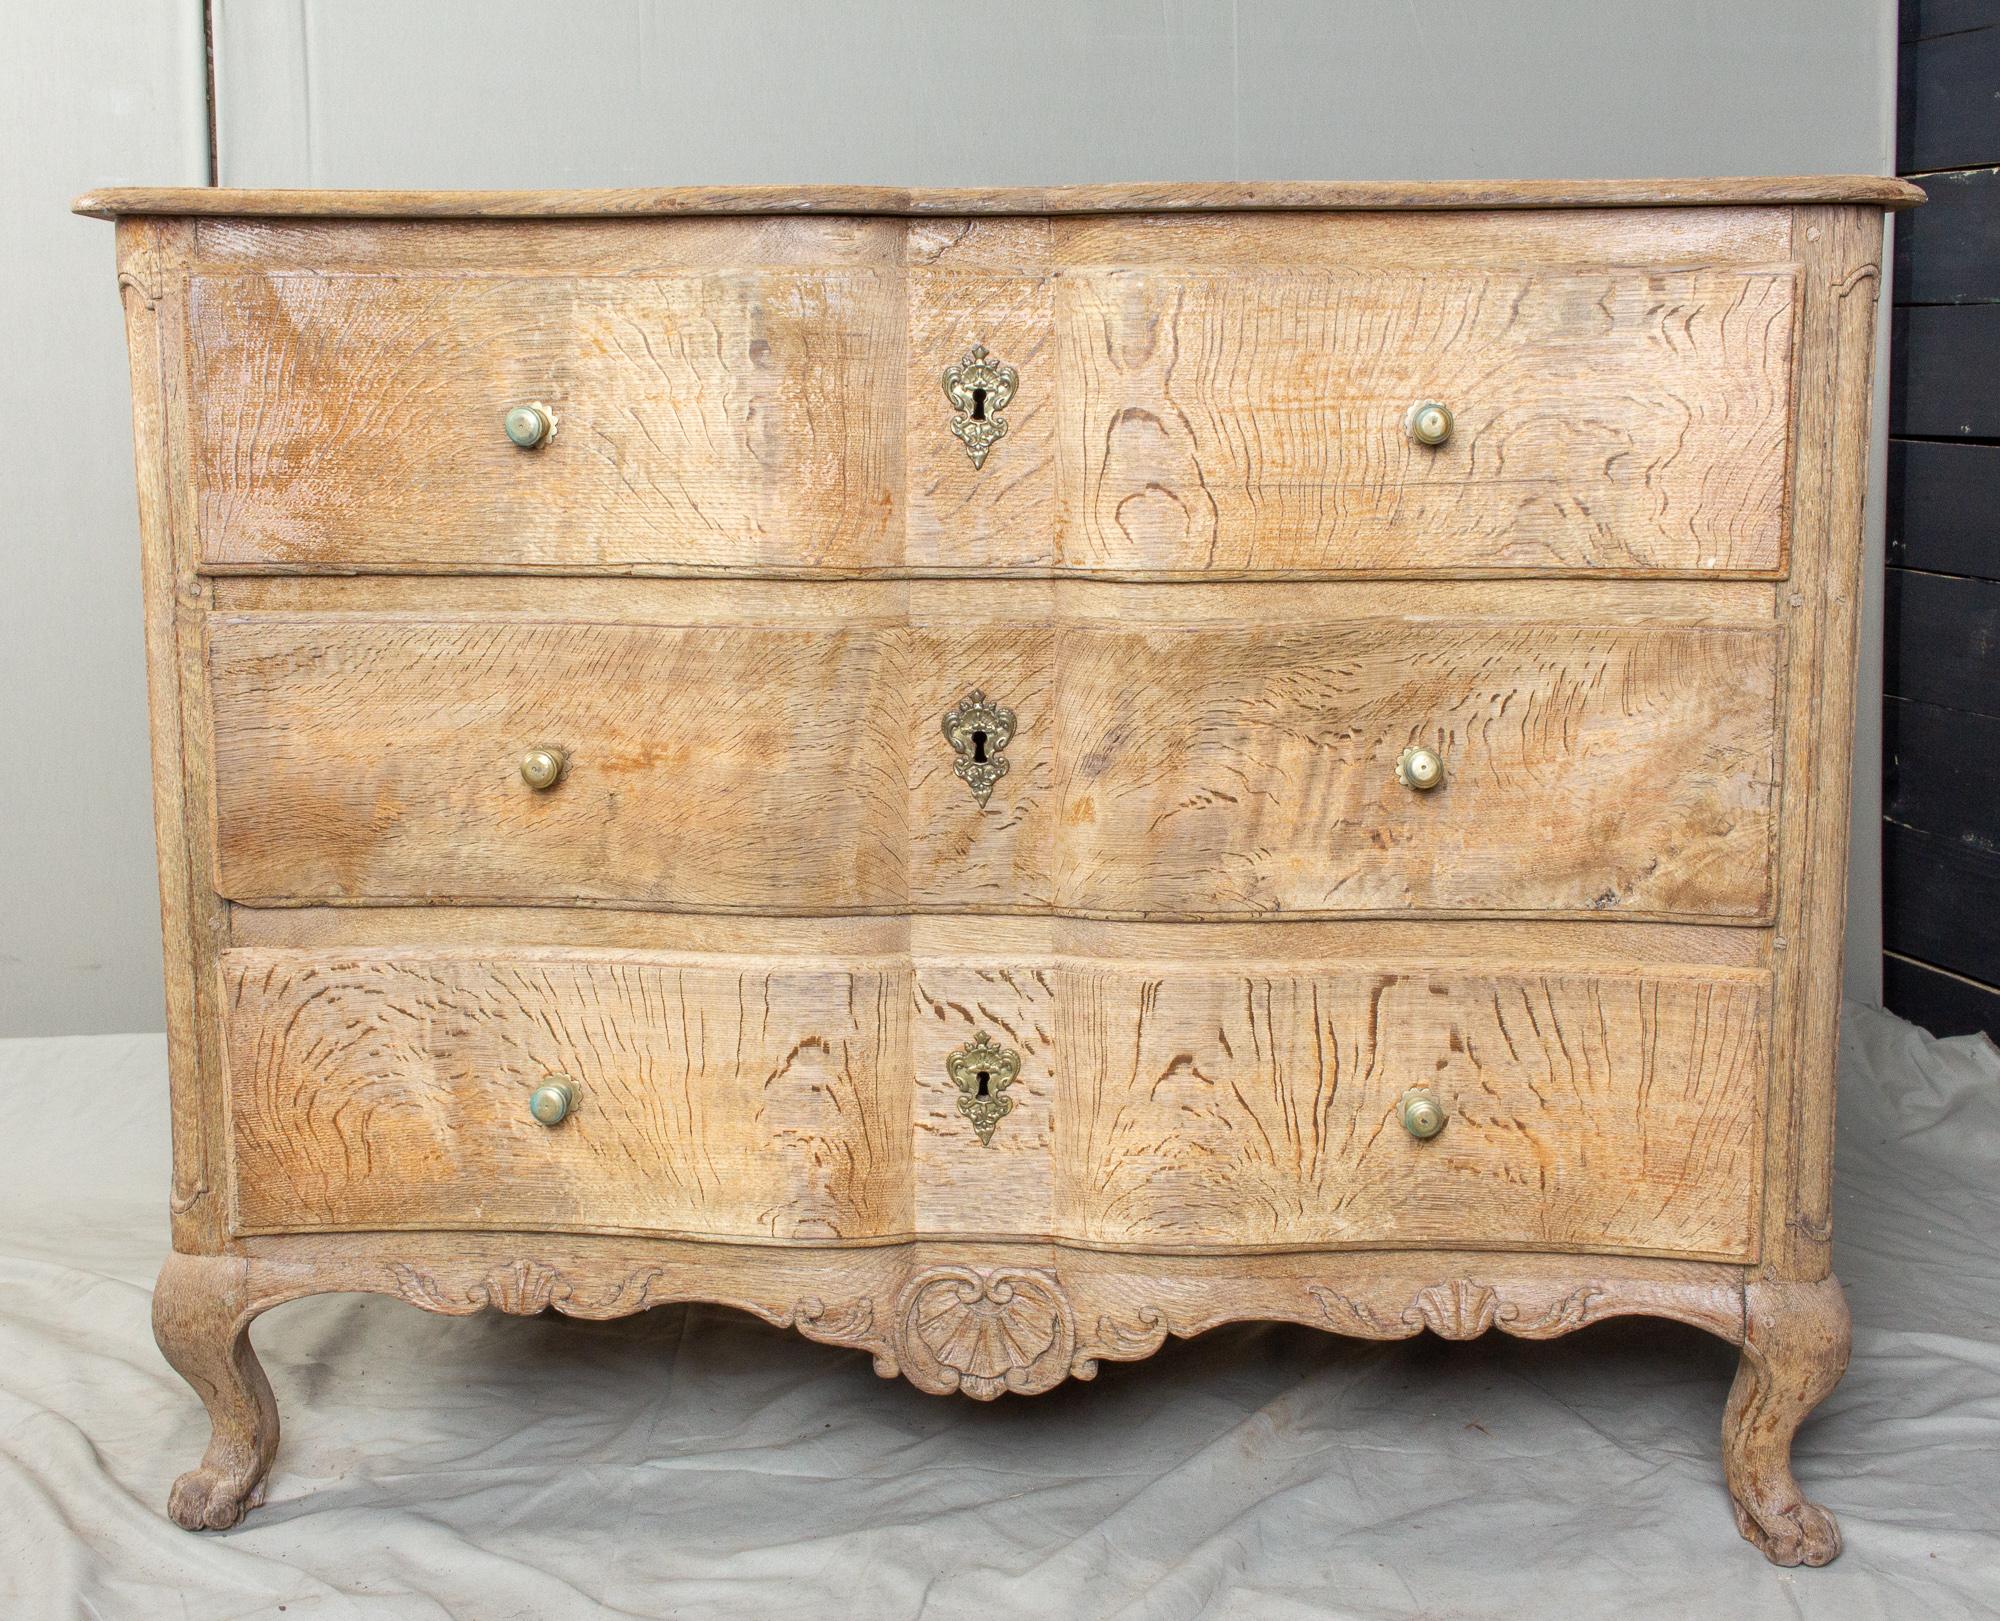 This is an antique French oak commode featuring curved-front drawer with brass pulls and escutcheons. There are three drawers which are on rails, and each opens and closes smoothly. There is some fluting on the corners and the top is finished with a